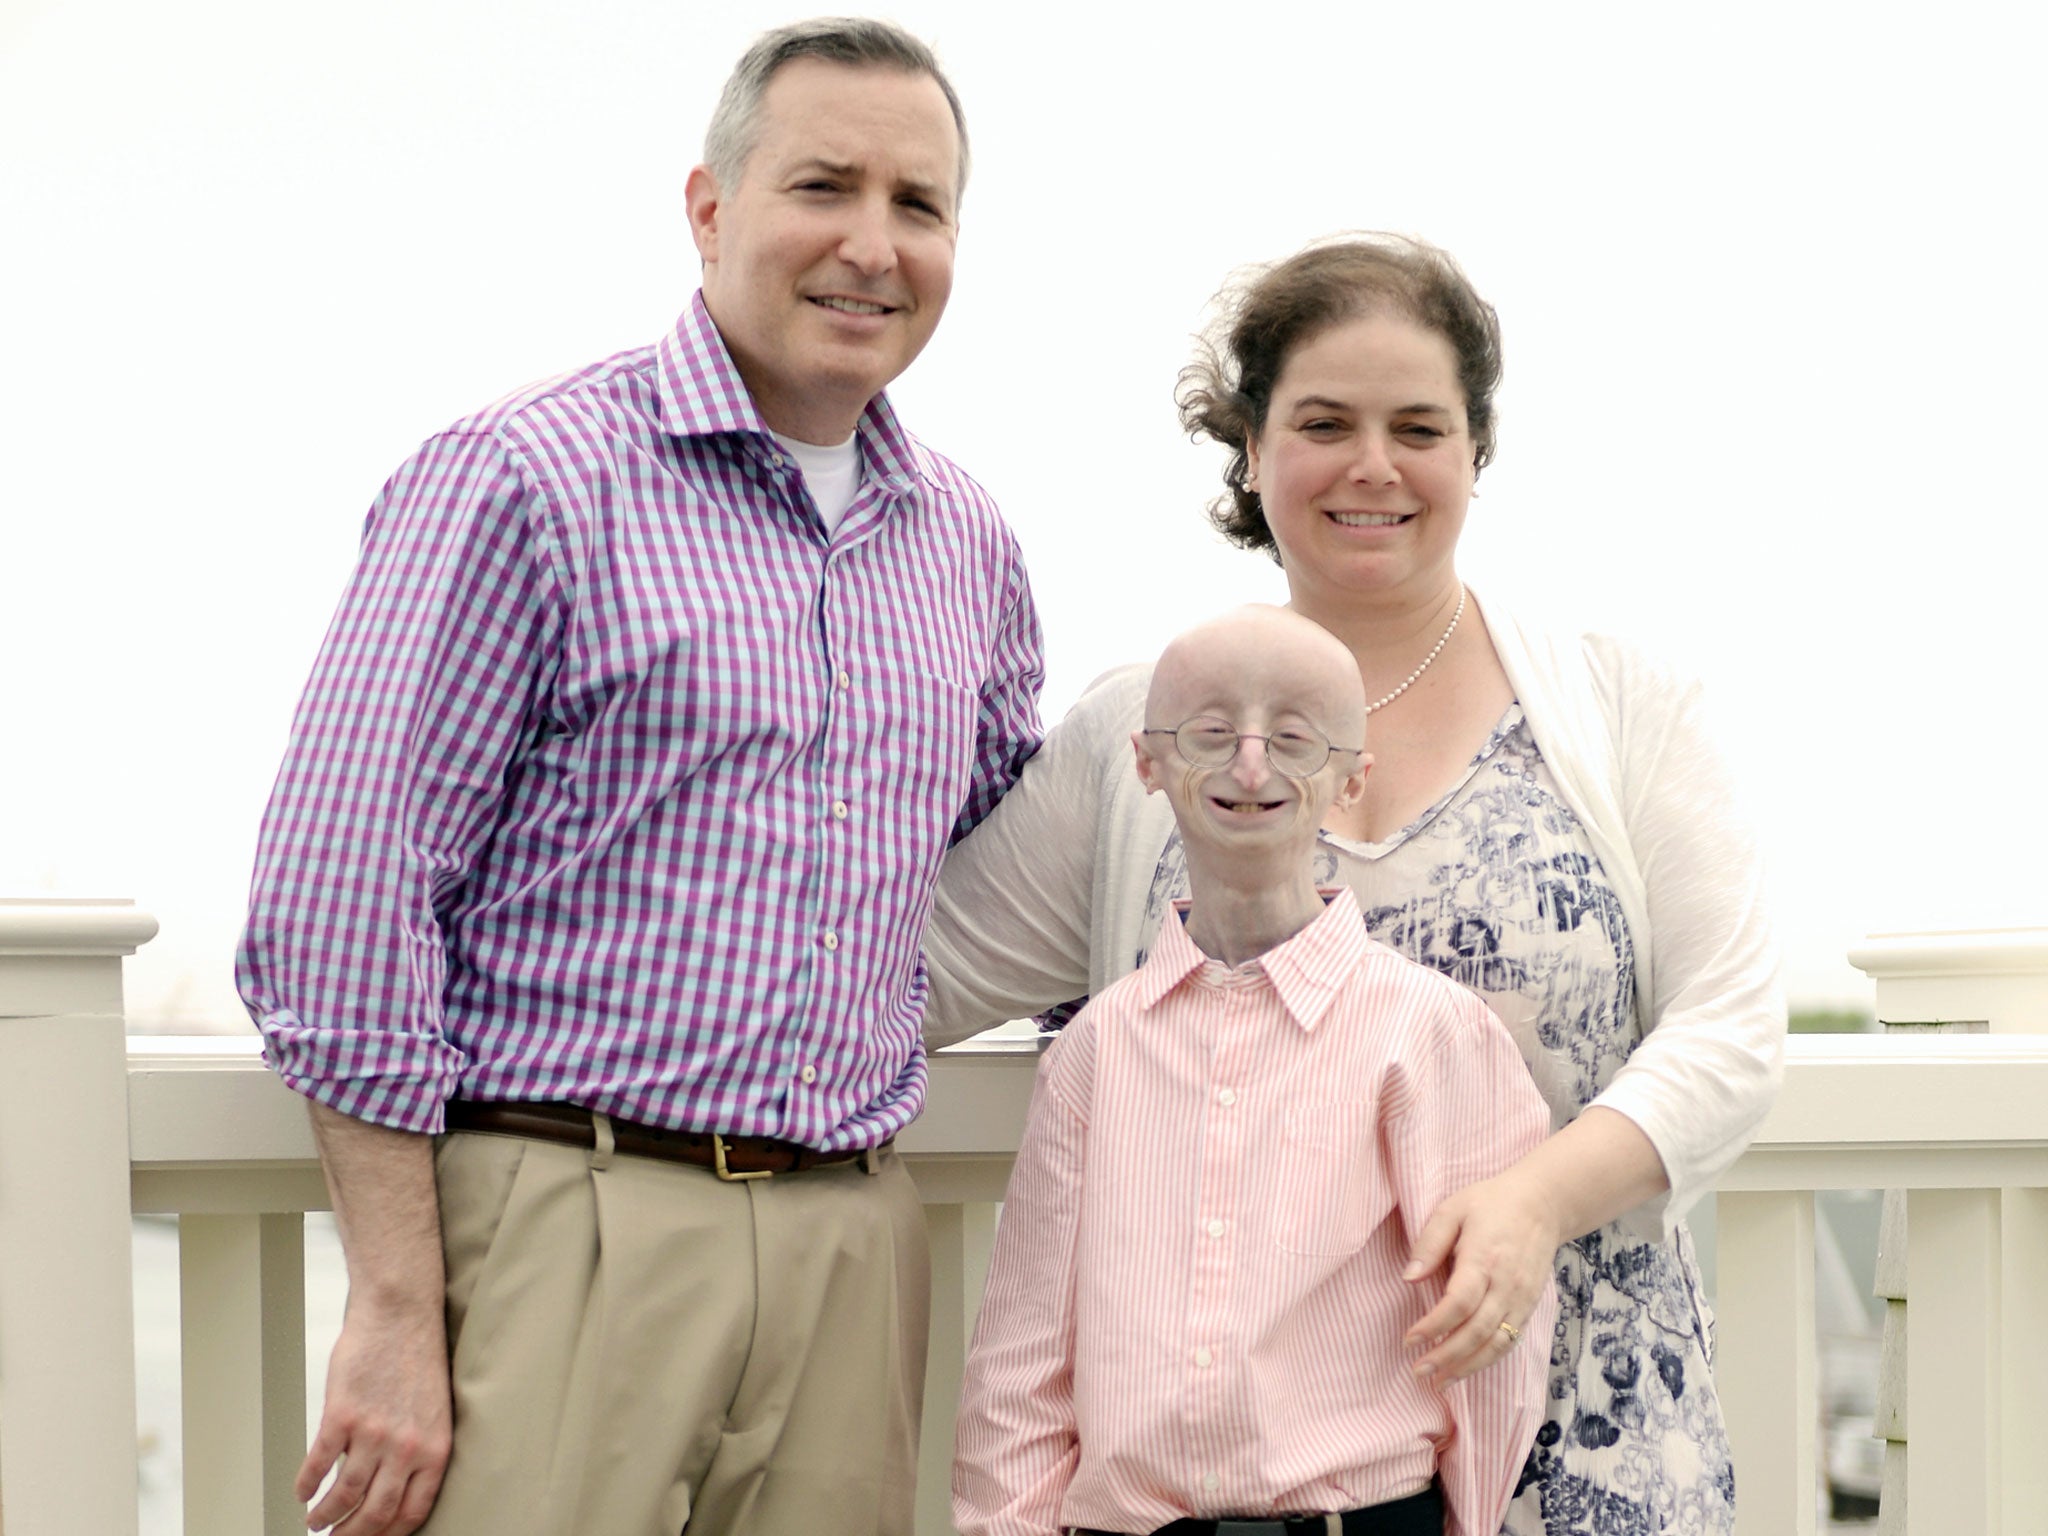 The late Sam Berns (centre) with his parents Scott Berns and Leslie Gordon at the 18th Annual Nantucket Film Festival in June 2013.